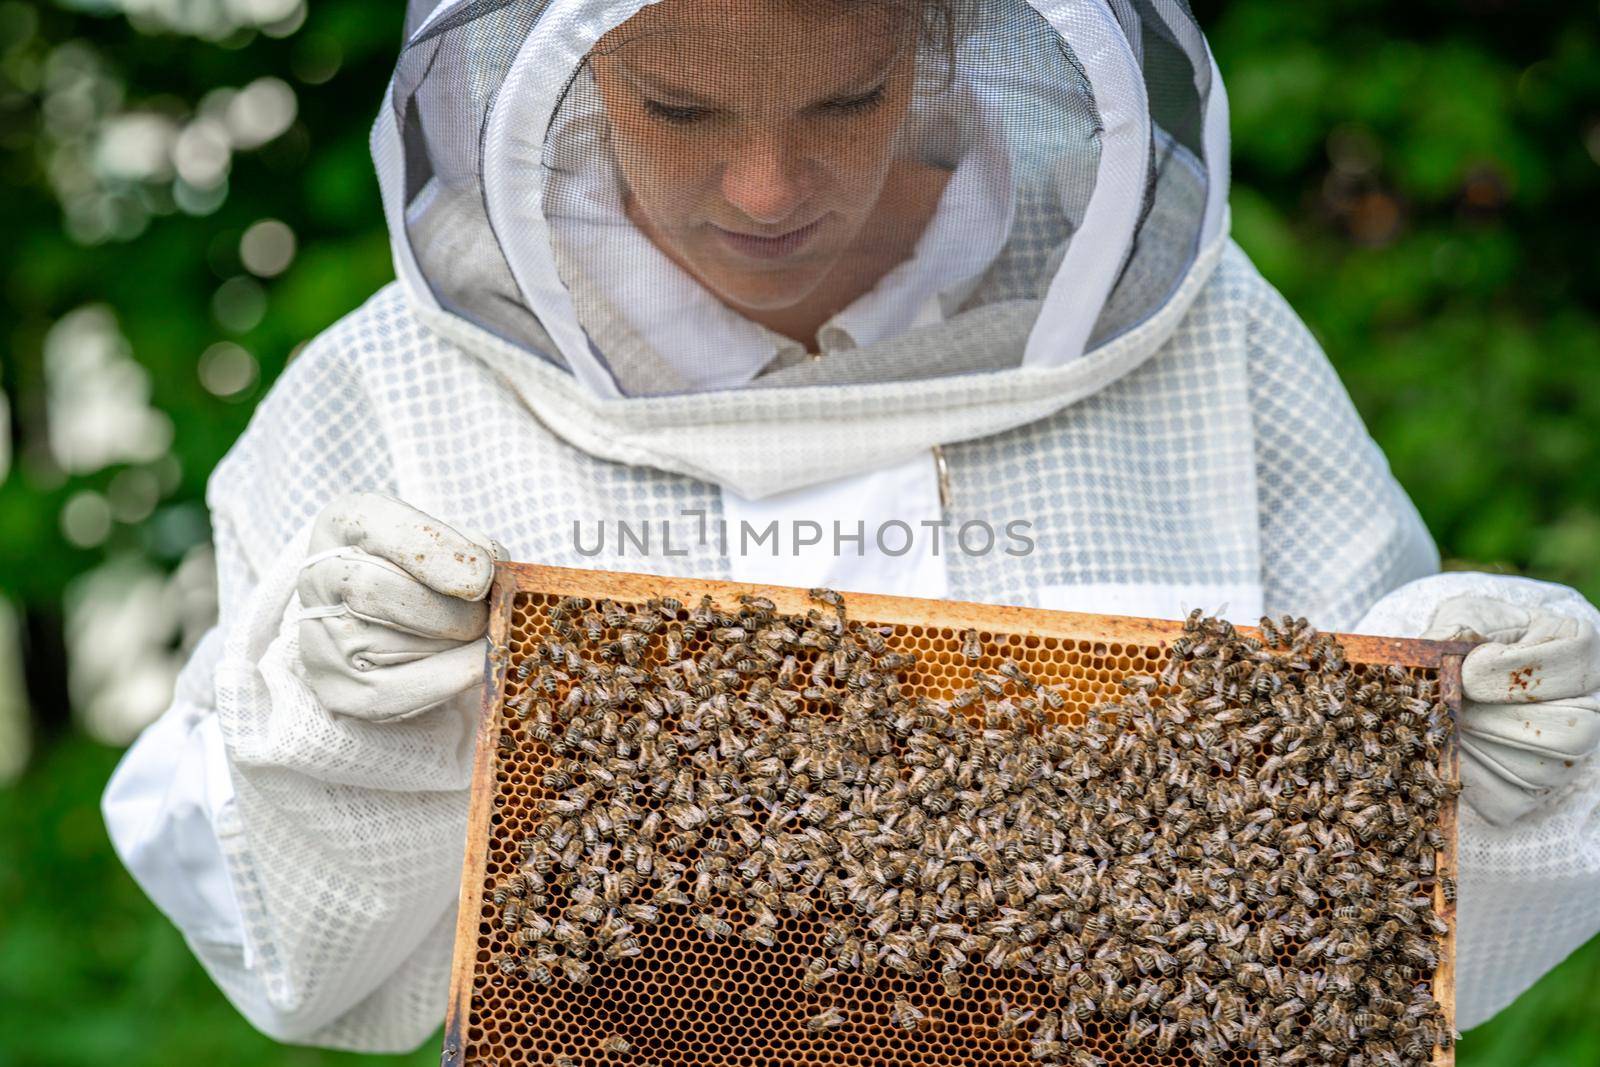 Beekeeper inspects bees in a protective suit by Edophoto